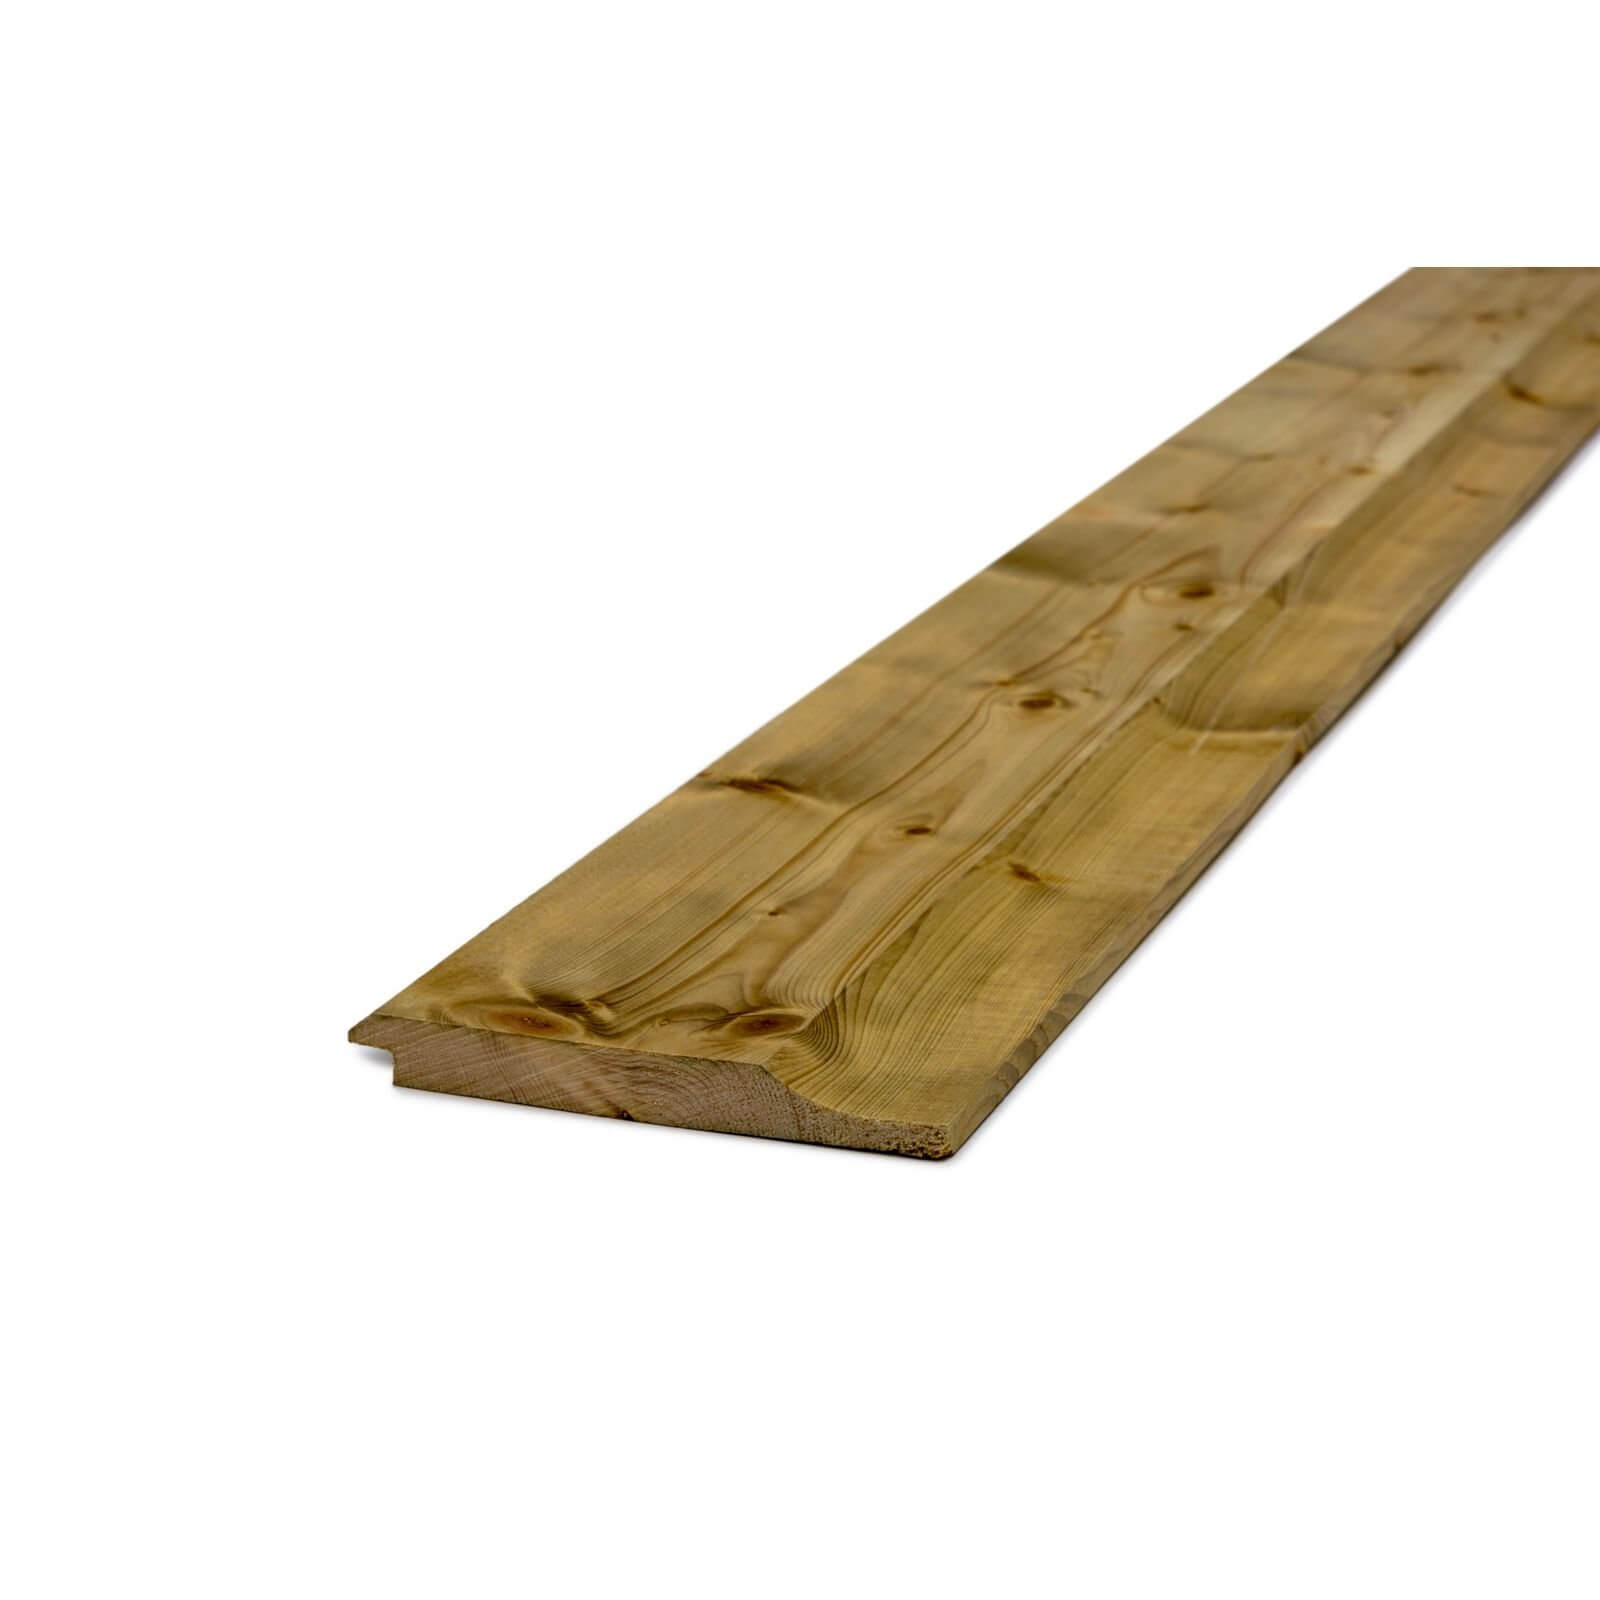 Photo of Treated Shiplap Cladding 18 X 119mm X 2.4m - Pack Of 5